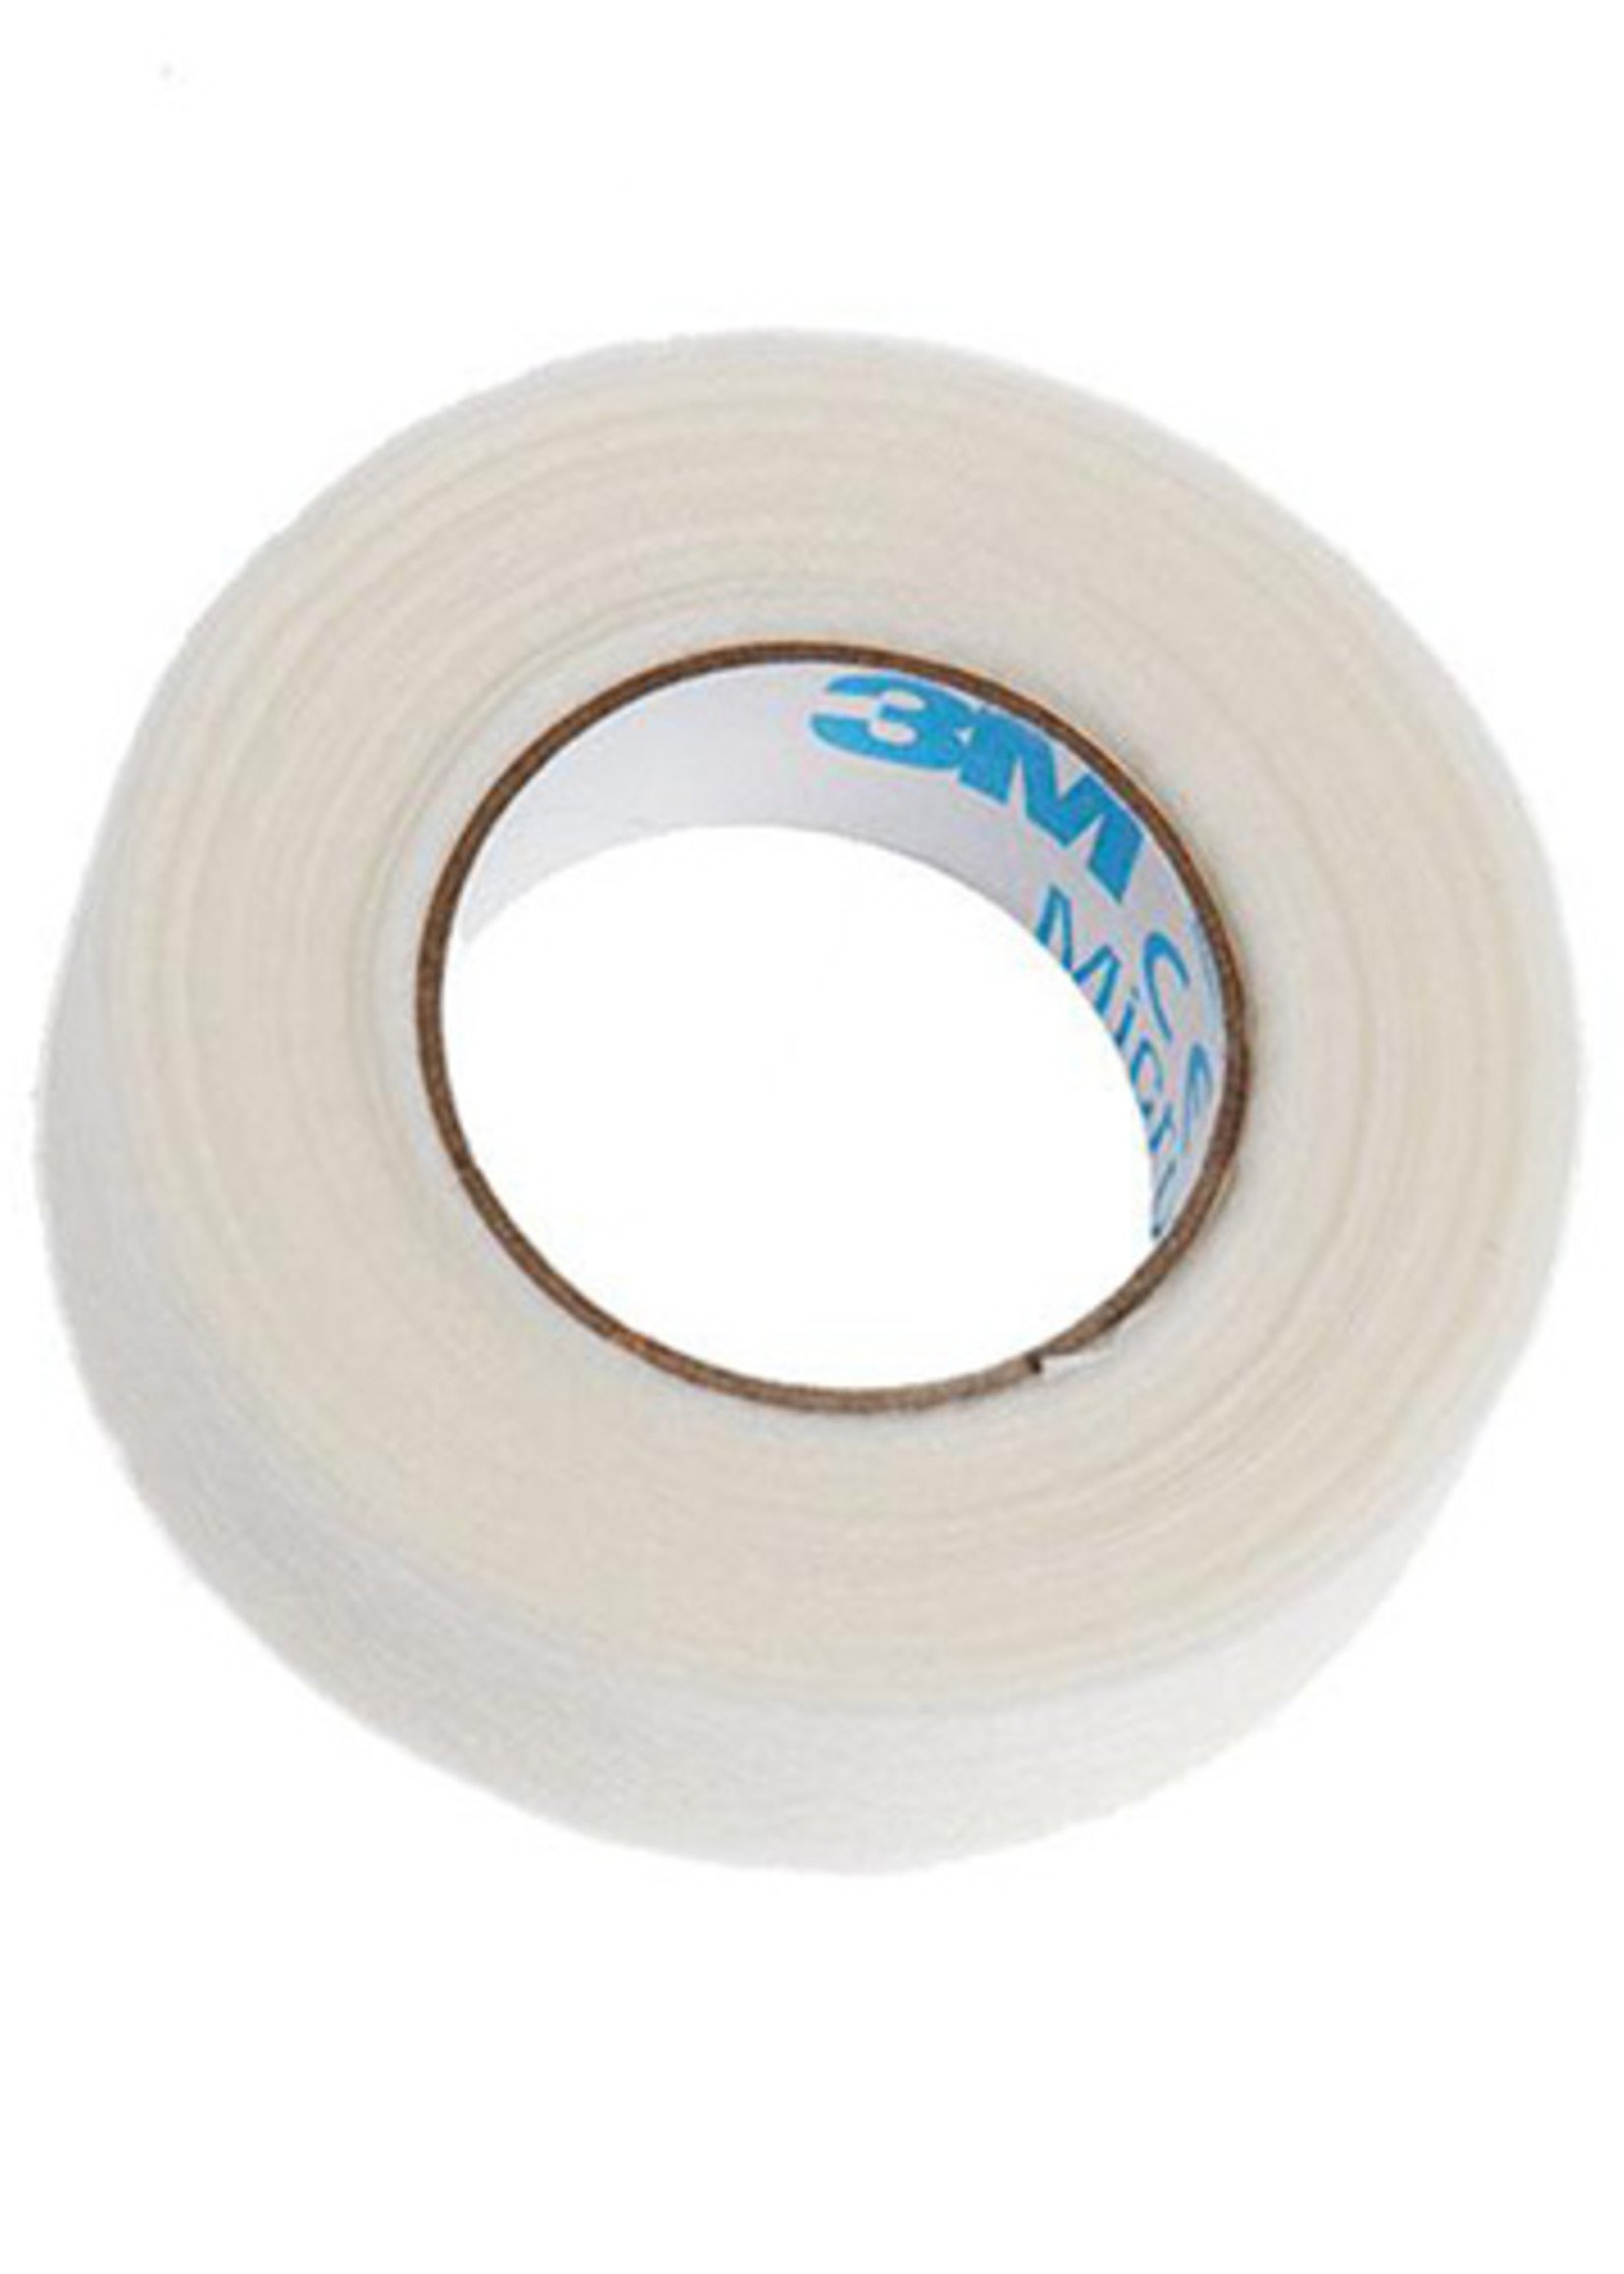 Abstract® 3M Micropore hypoallergenic paper tape 1,25 cm x 9,1 m incl dispenser